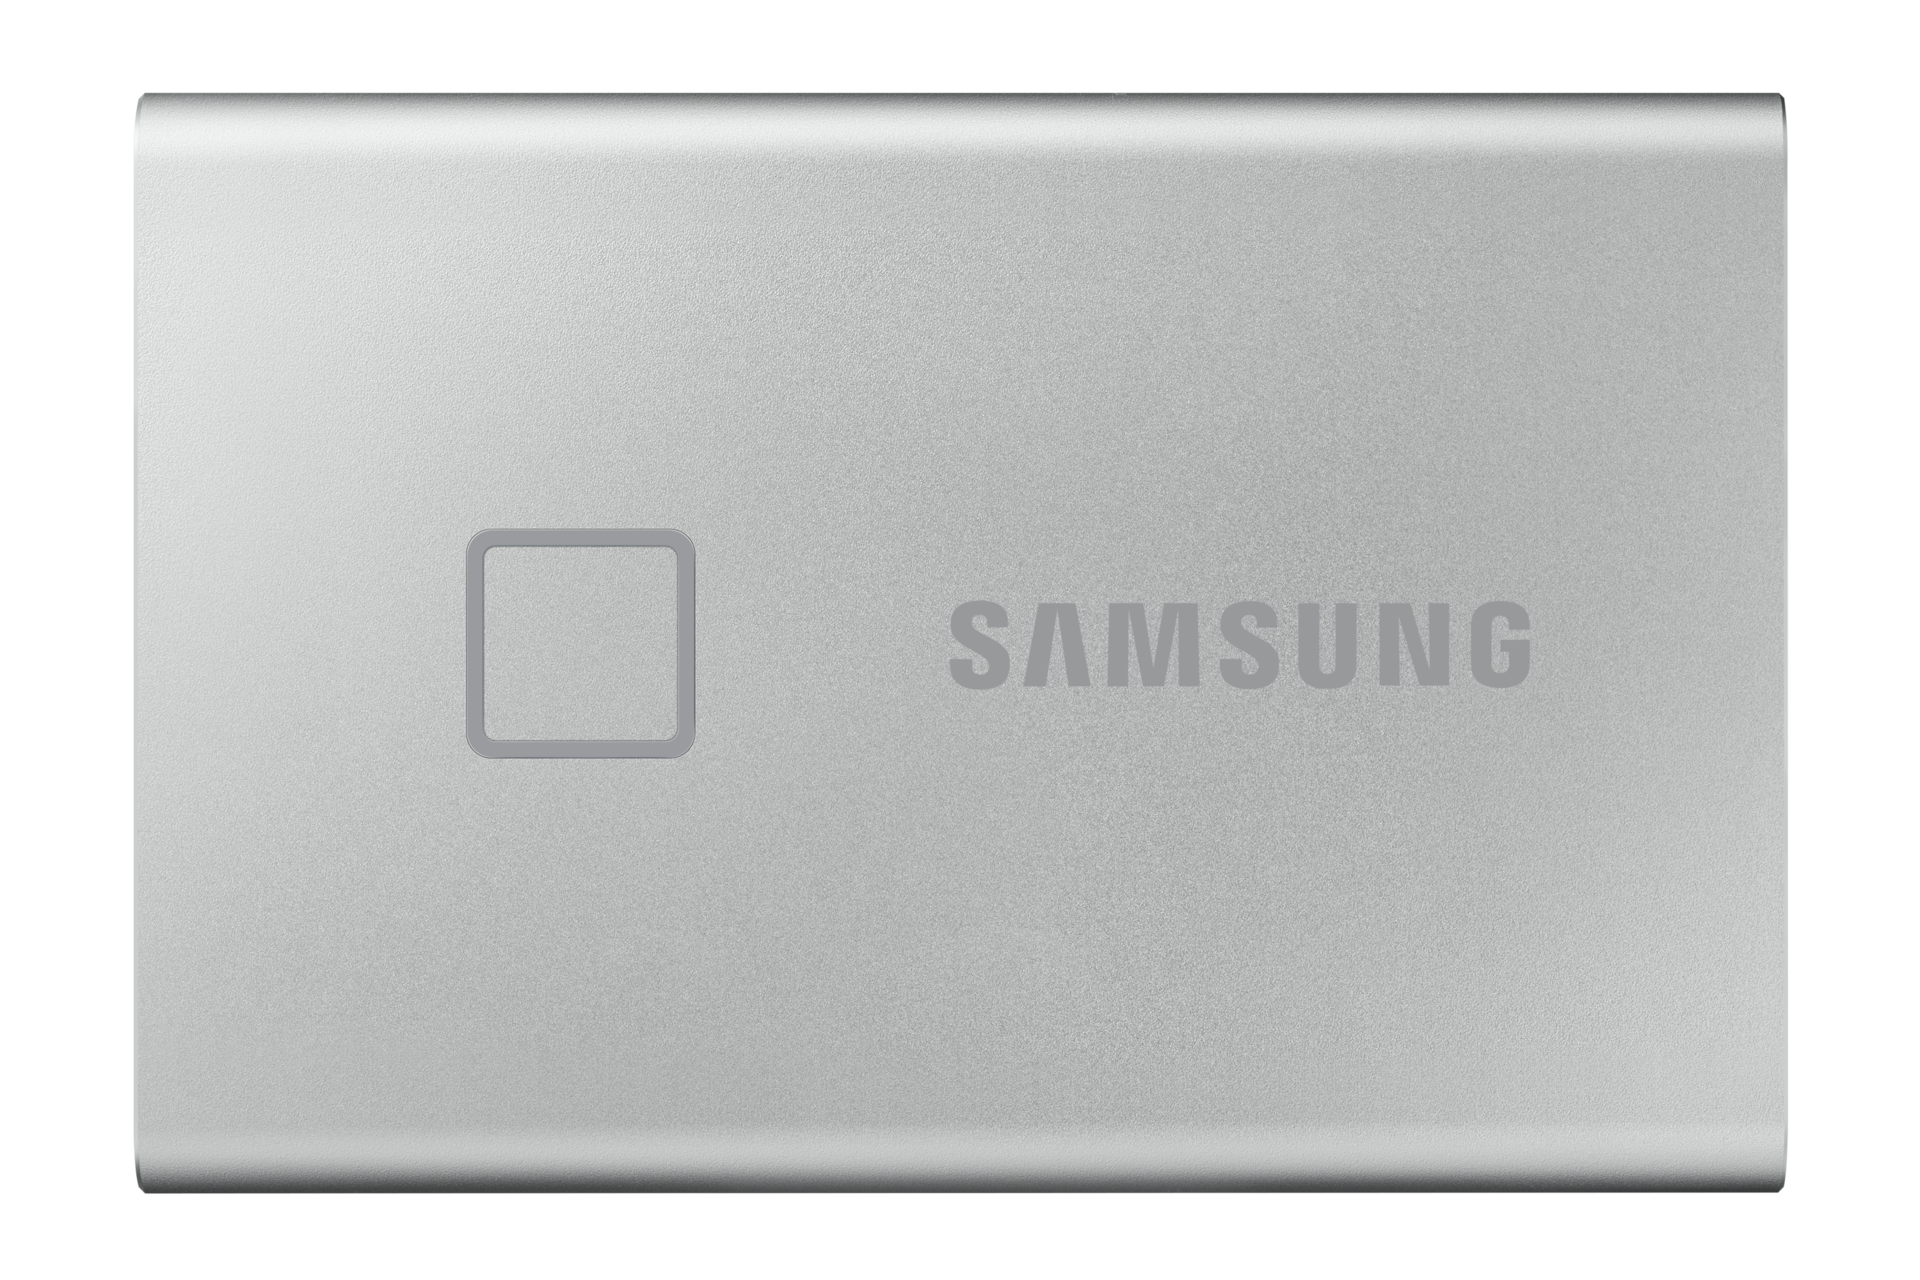 Samsung SSD T7 Touch 1TB - Silver, Silver